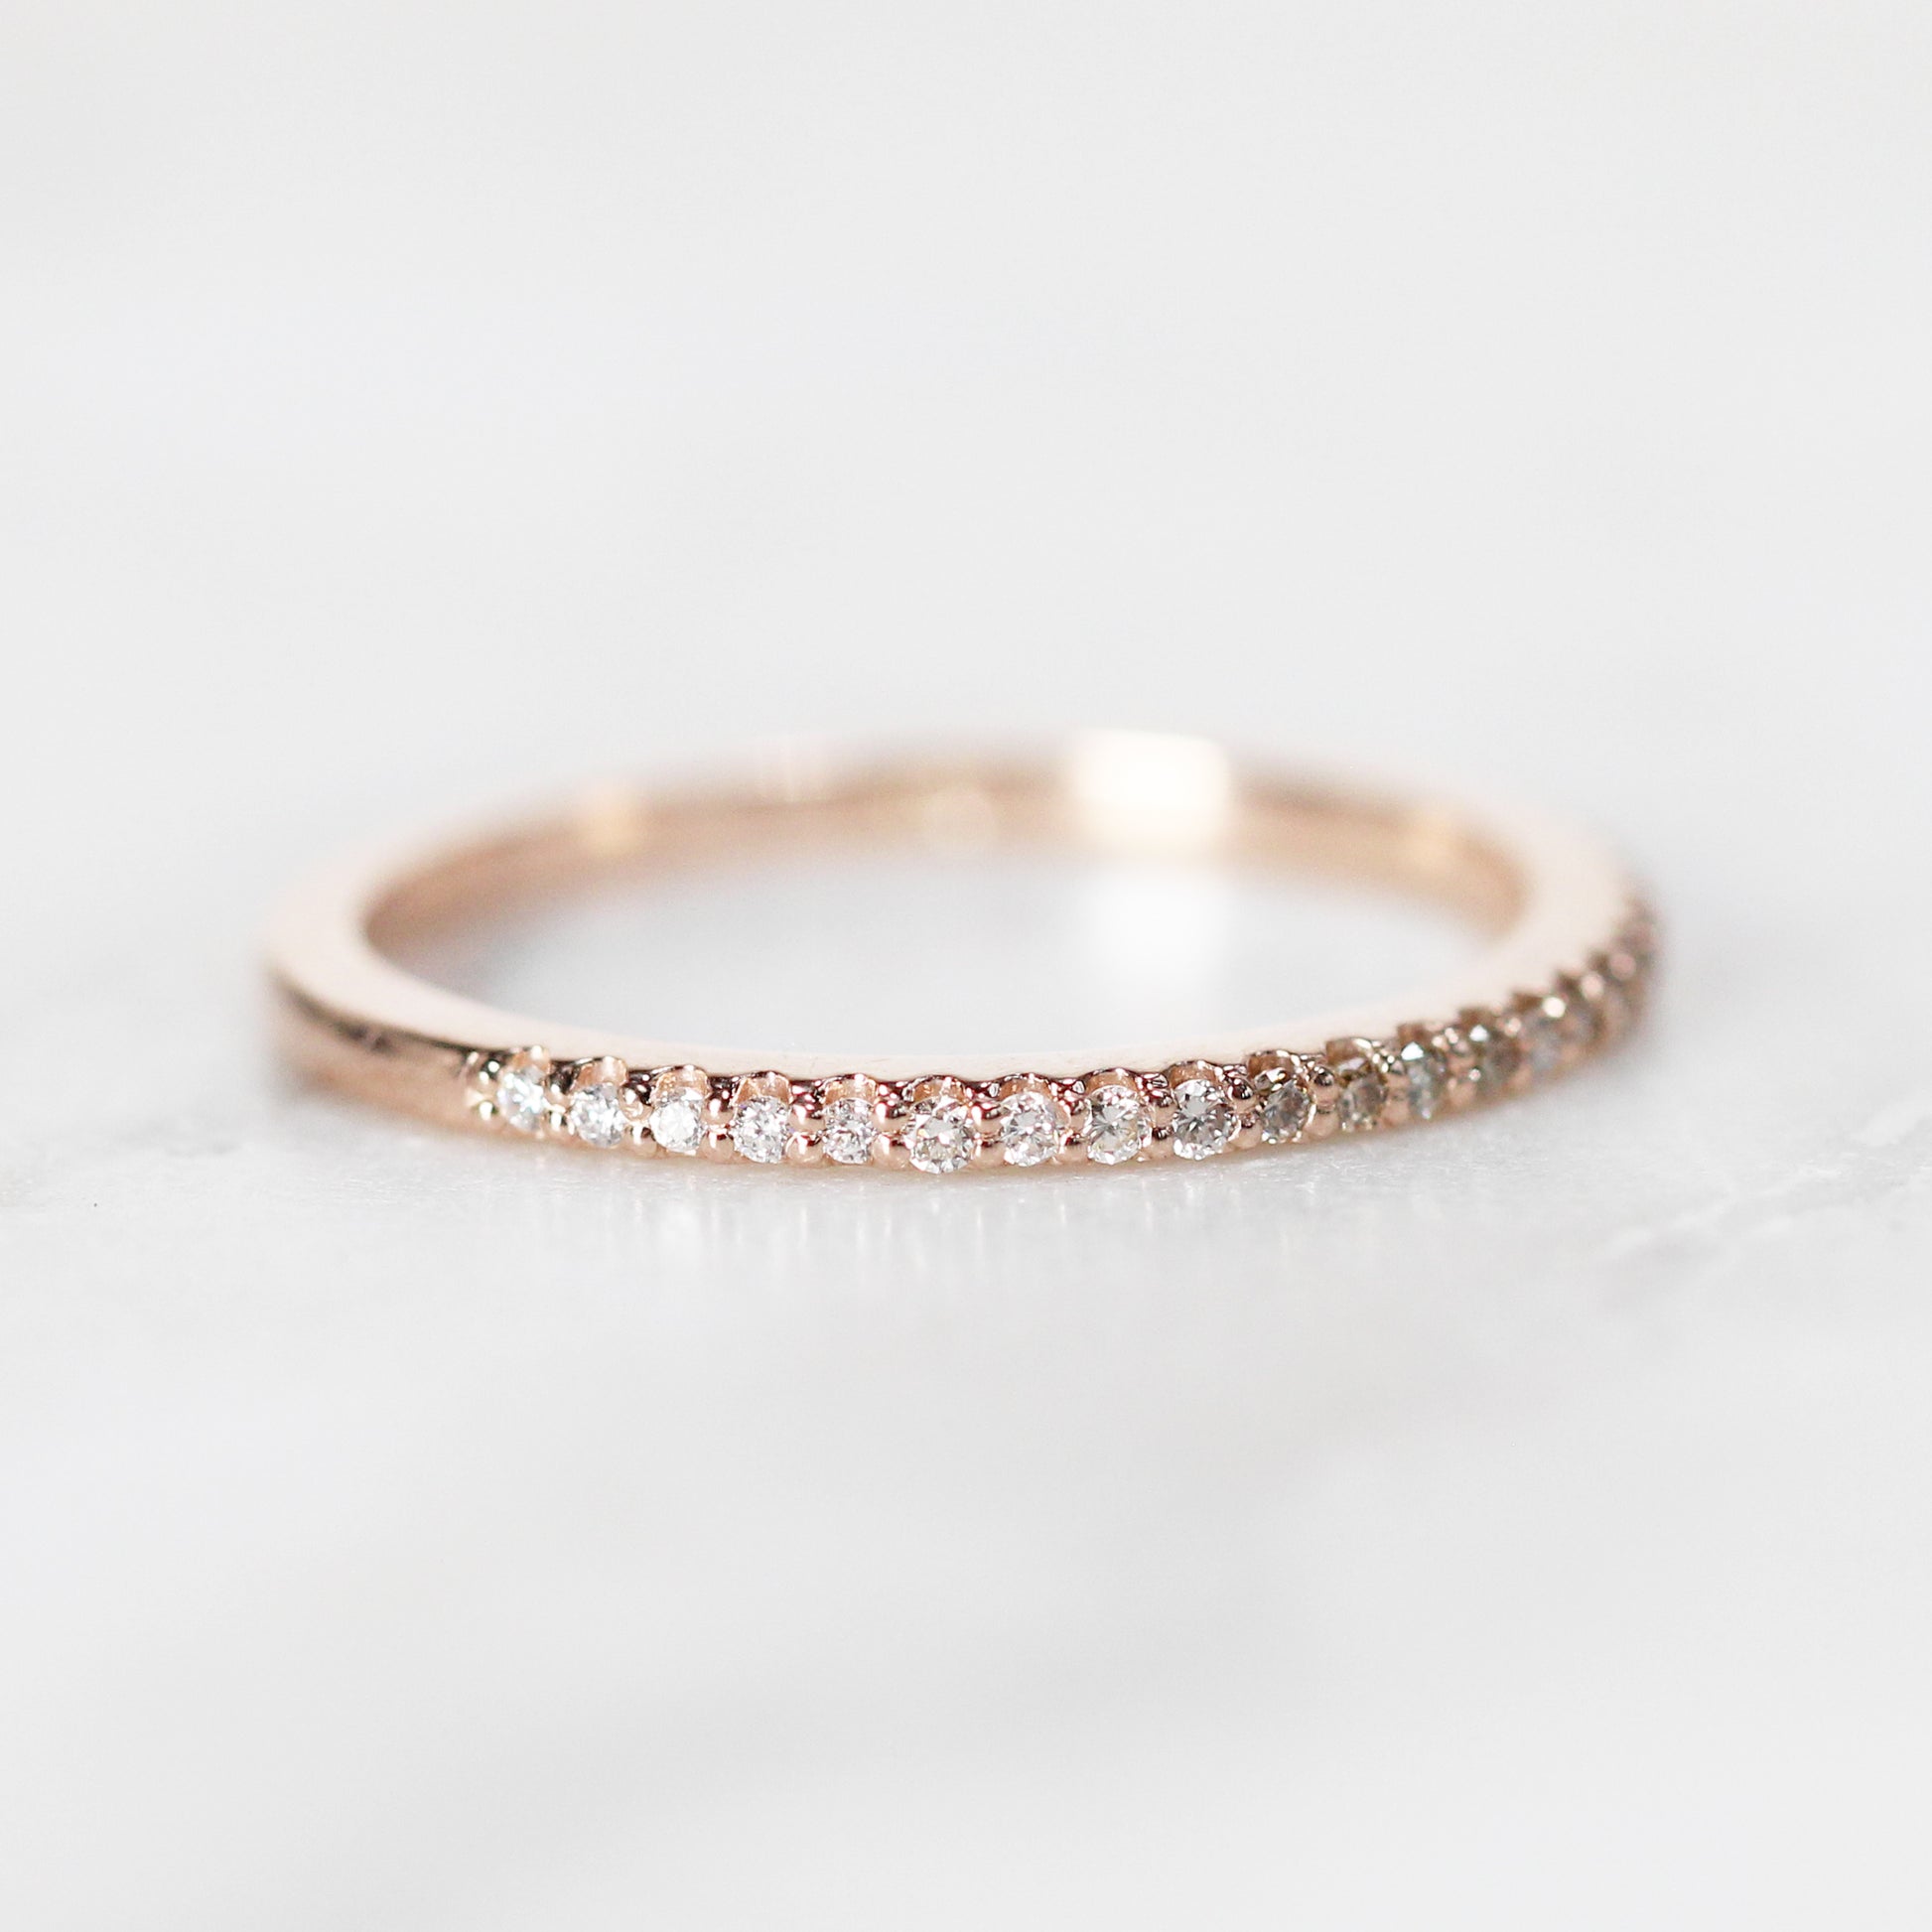 Constance - Pave set, minimal diamond wedding stacking band - Midwinter Co. Alternative Bridal Rings and Modern Fine Jewelry